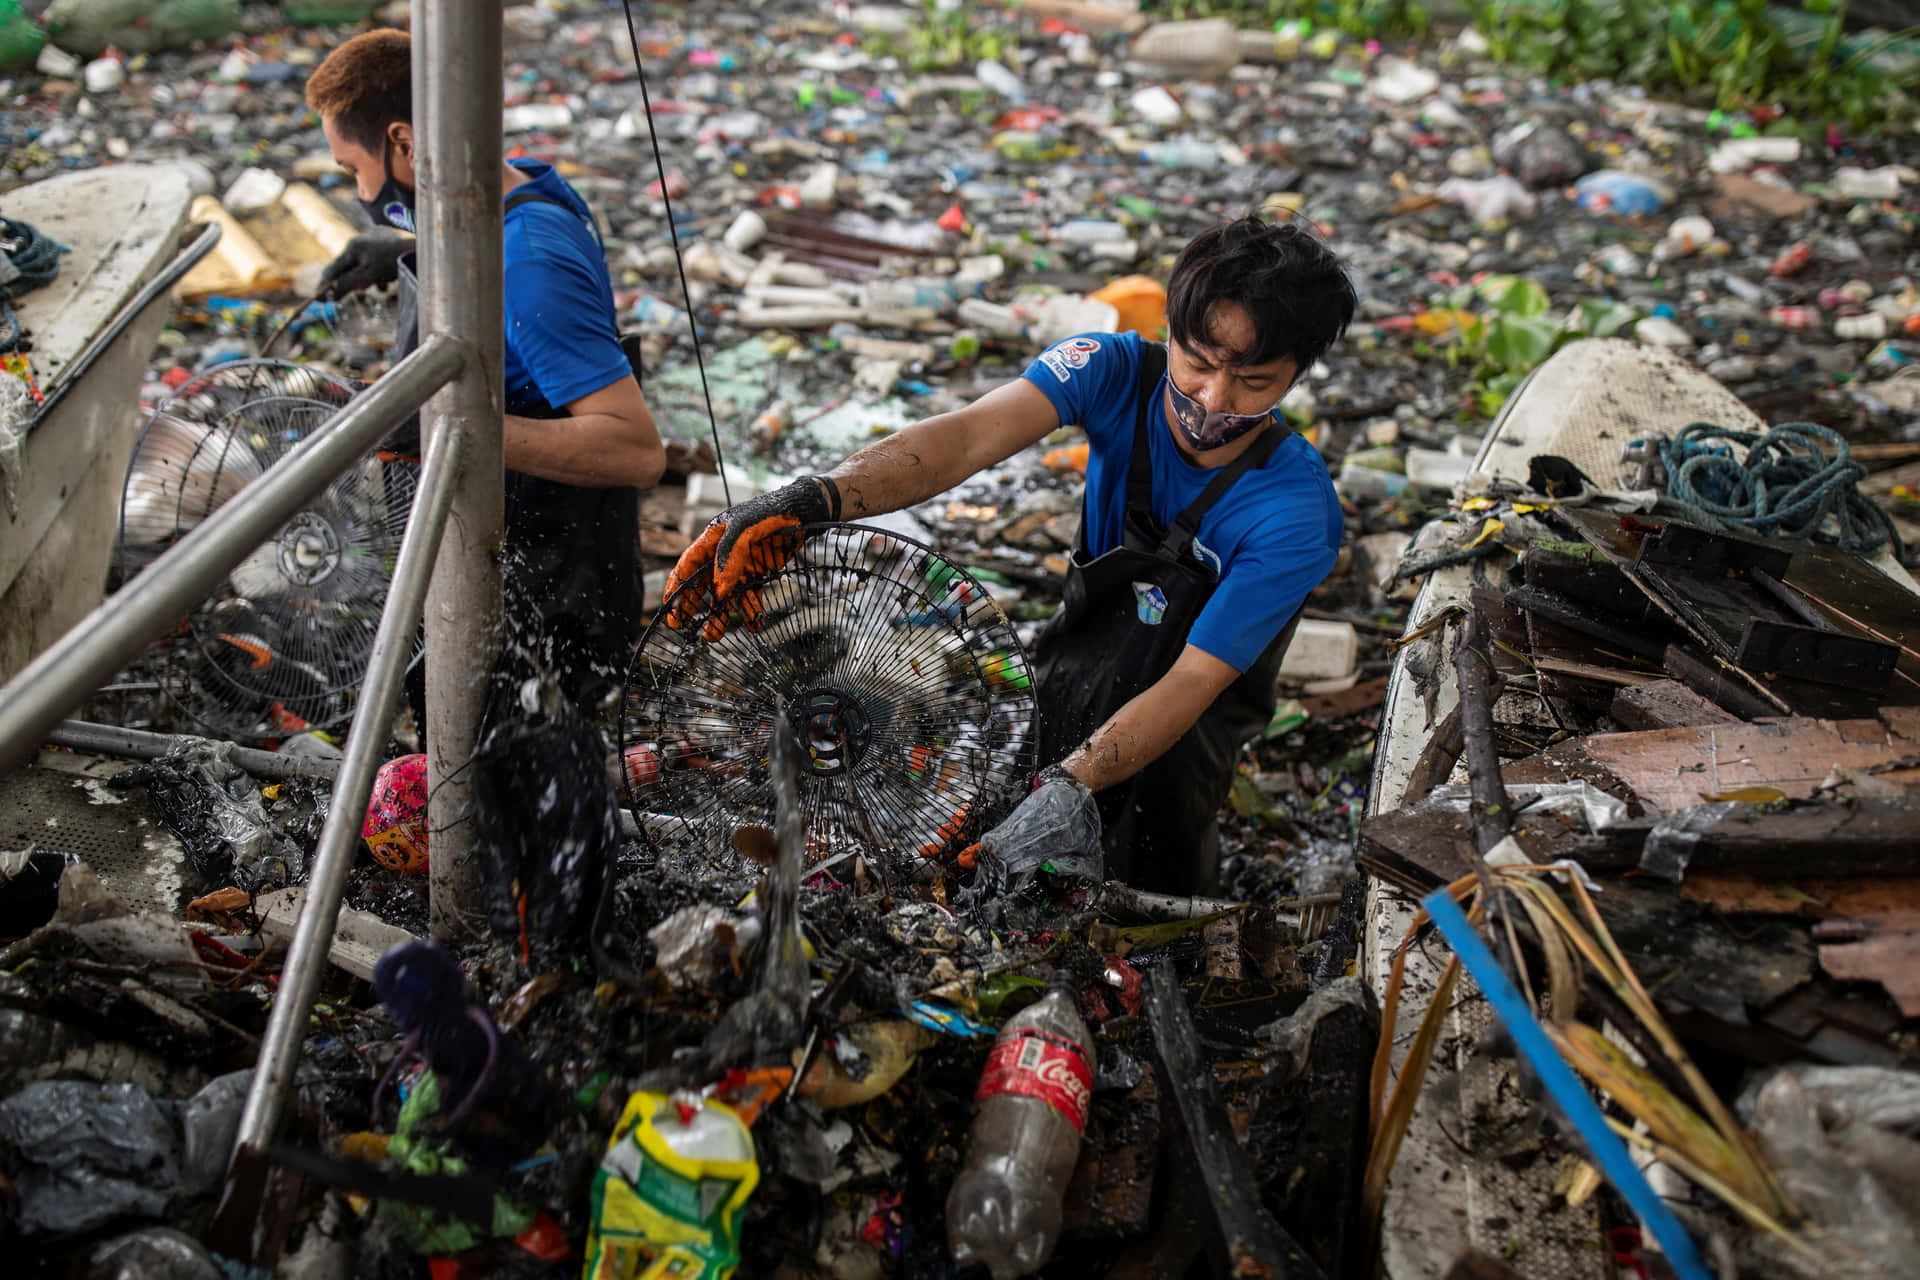 two men are cleaning up garbage in a trash pile